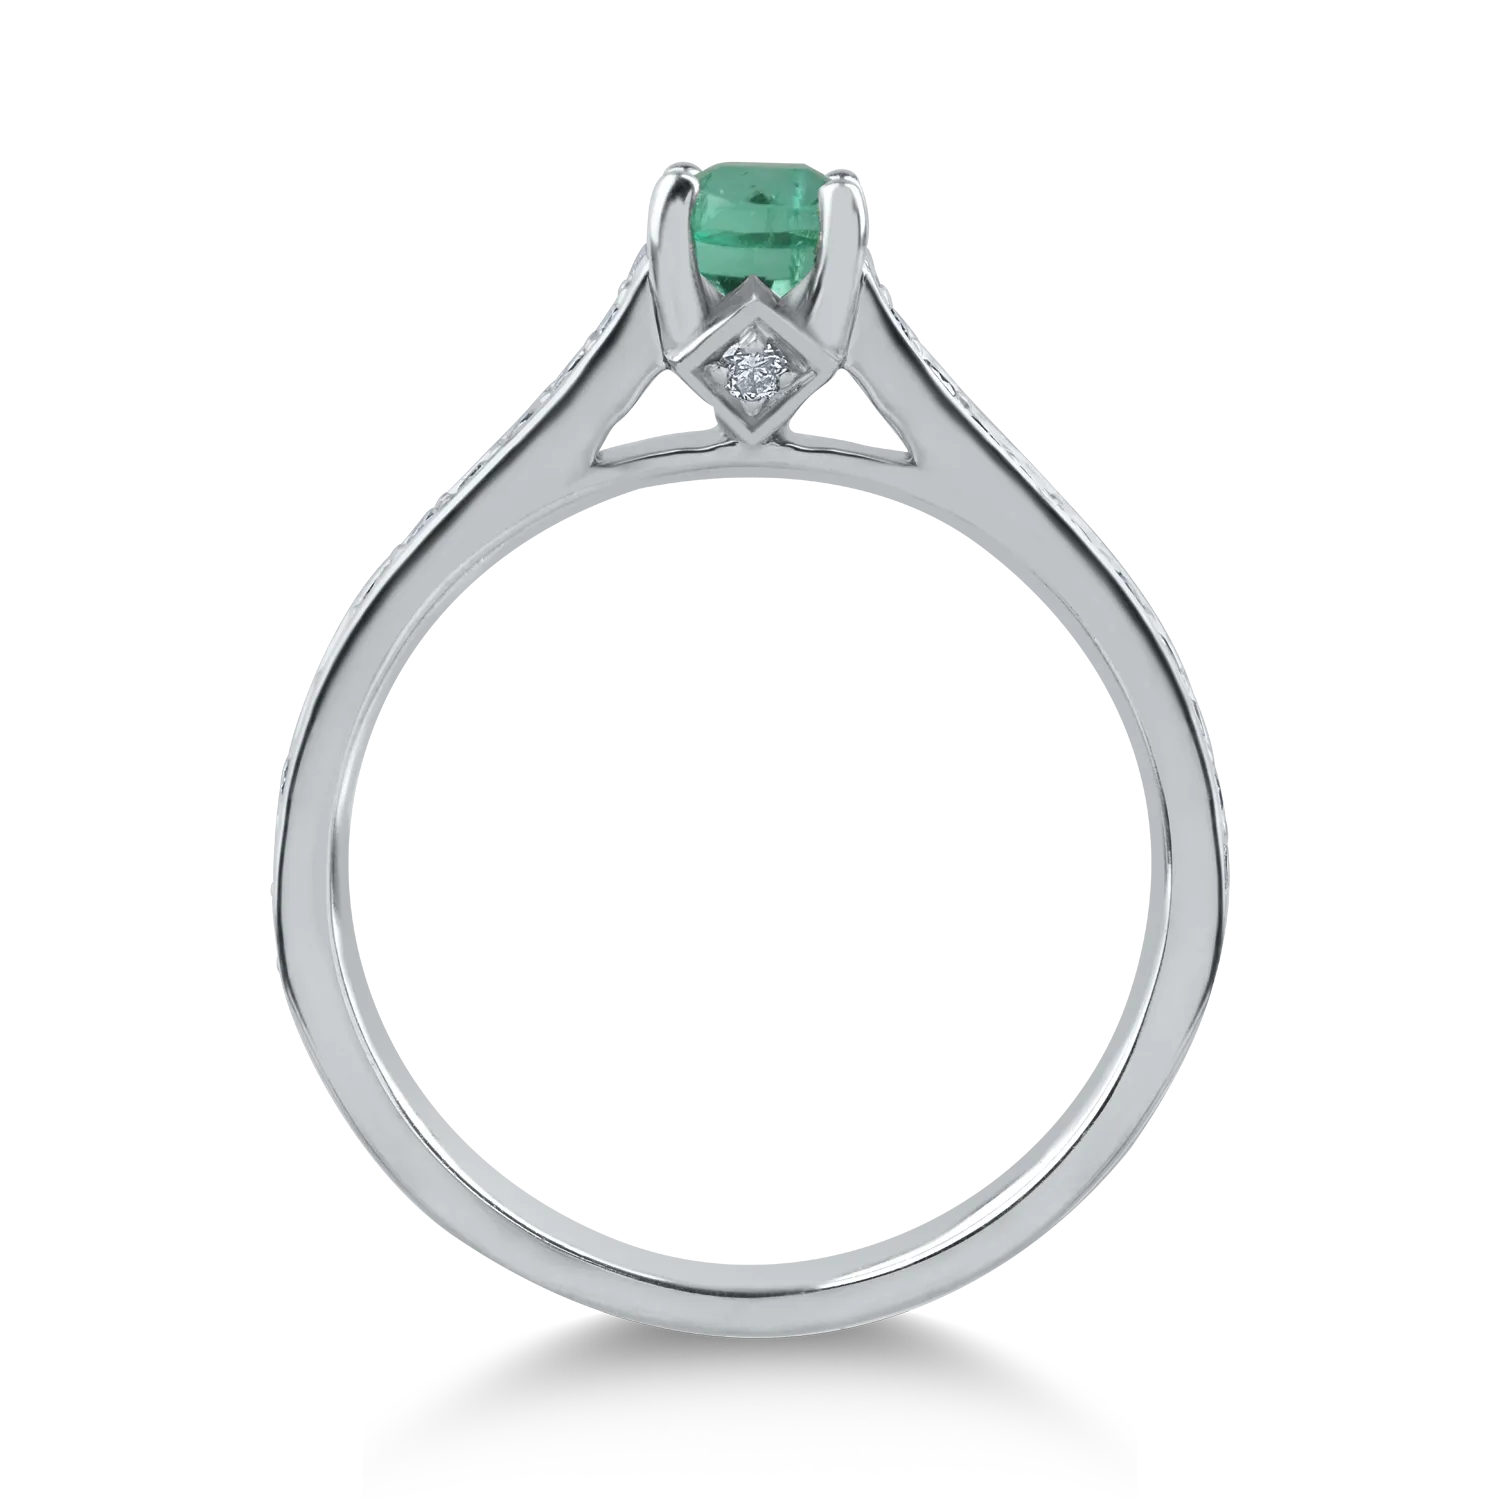 White gold engagement ring with 0.37ct emerald and 0.22ct diamonds